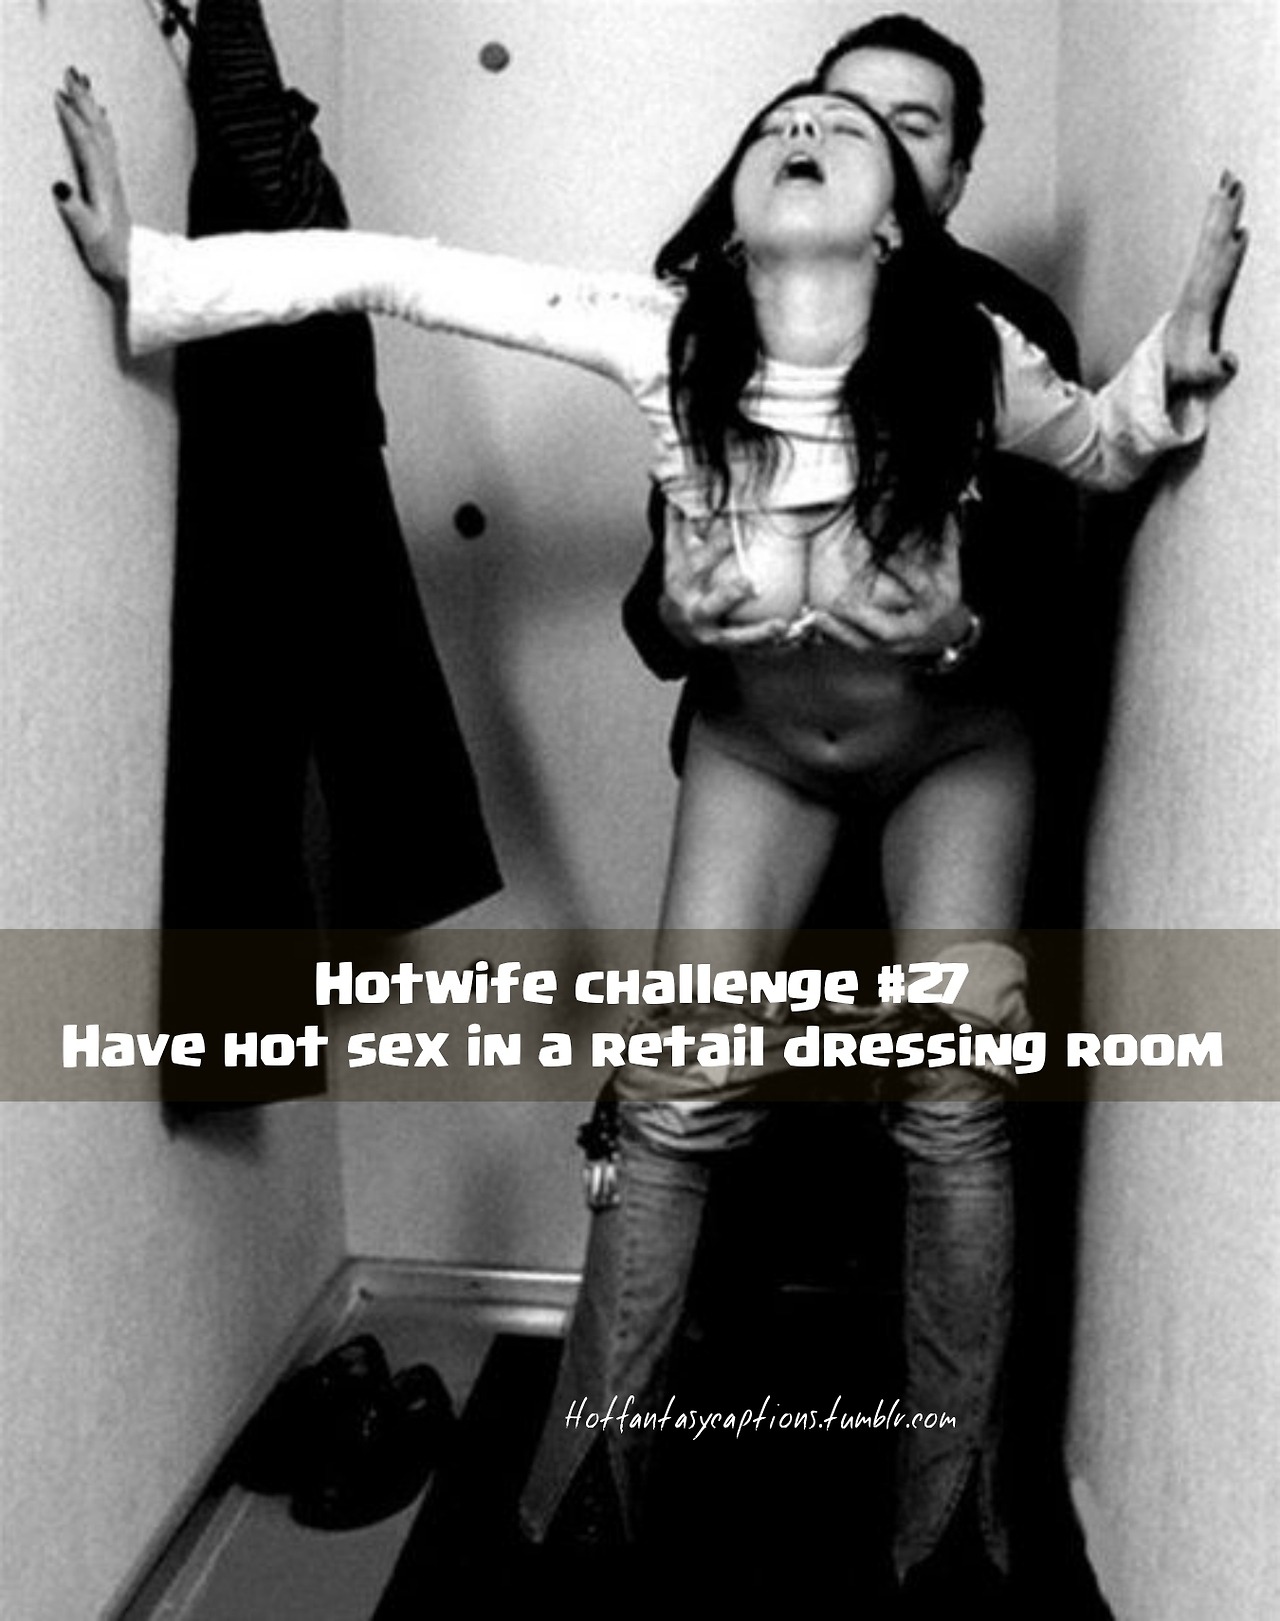 Hotwife challenge #27 - Have hot sex in a dressing room